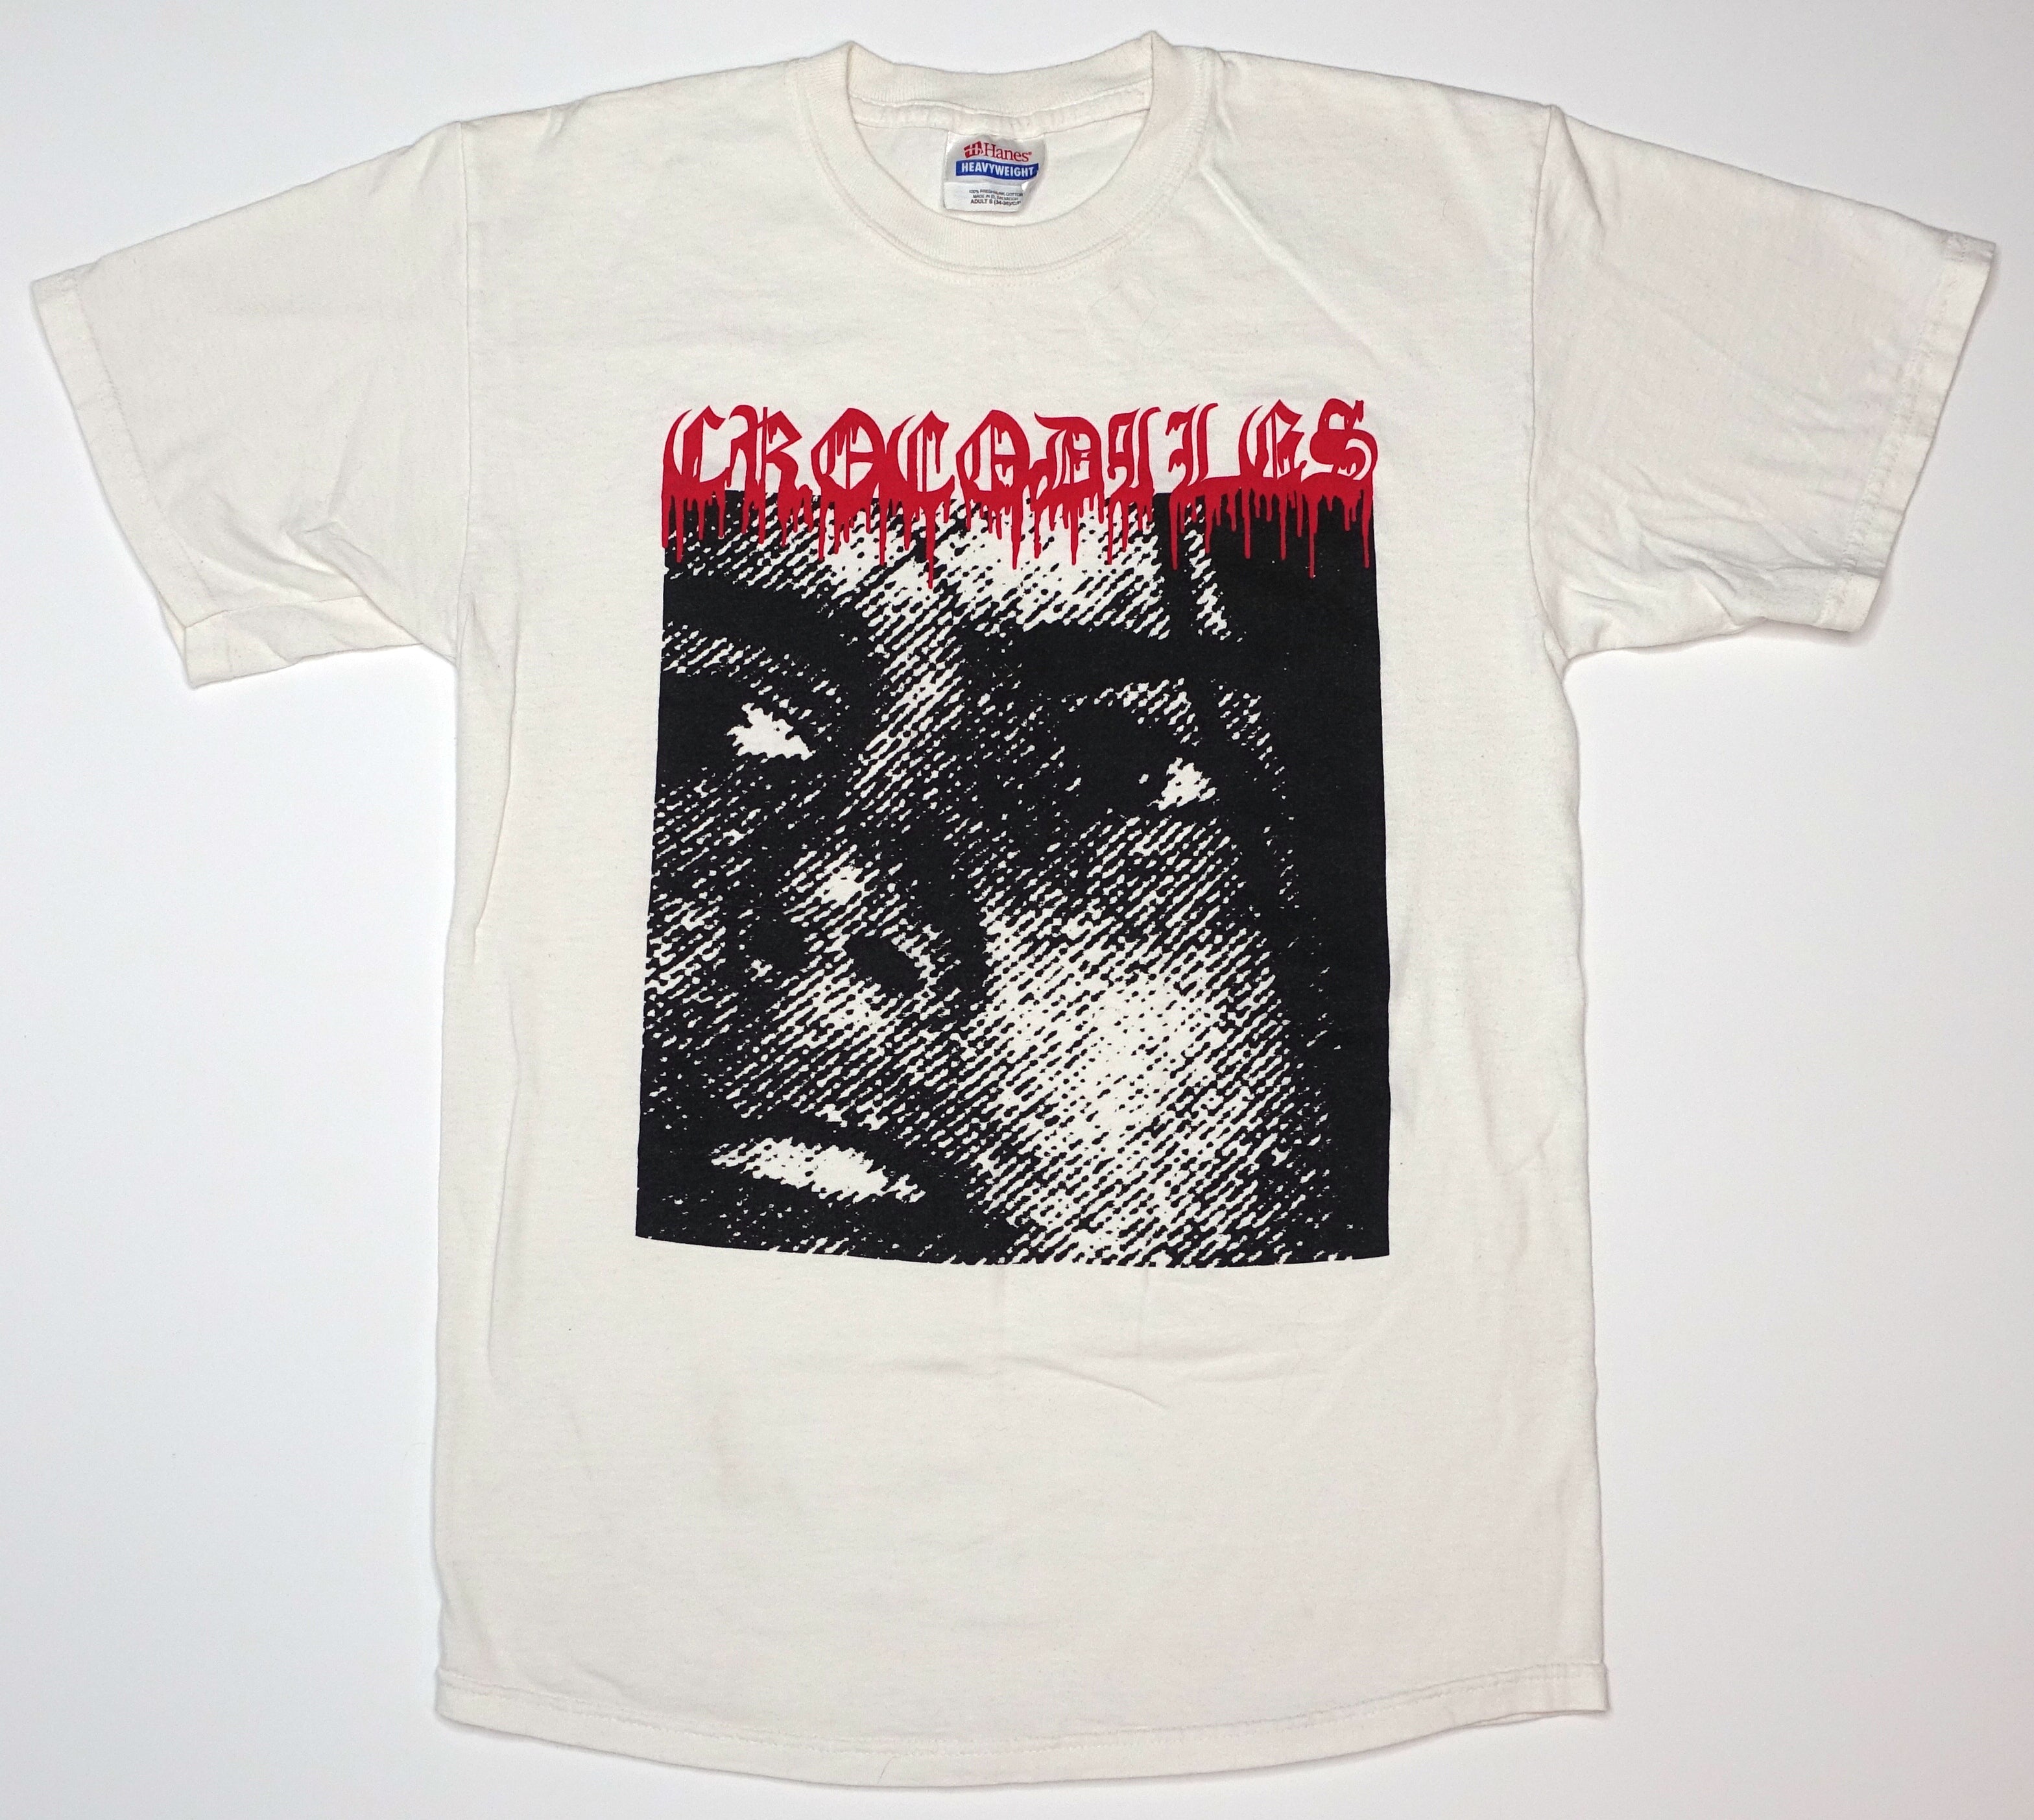 Crocodiles - Summer Of Hate 2009 Tour Shirt Size Small